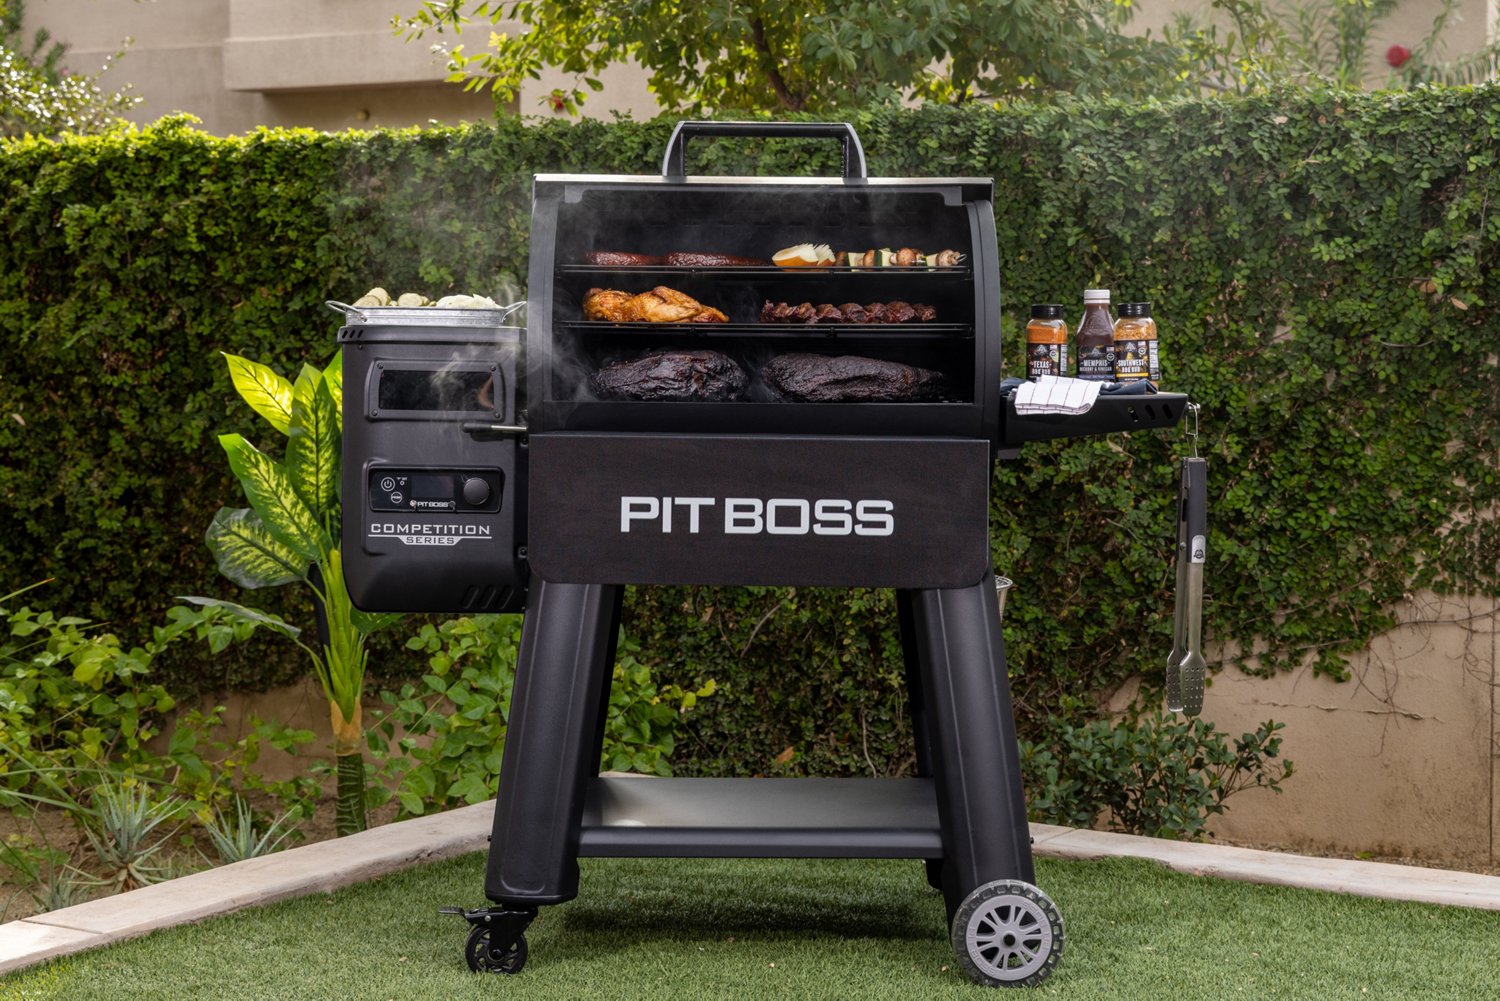 Pit Boss 1250 Competition Series Pellet Grill - Charcoal Grills at Academy Sports